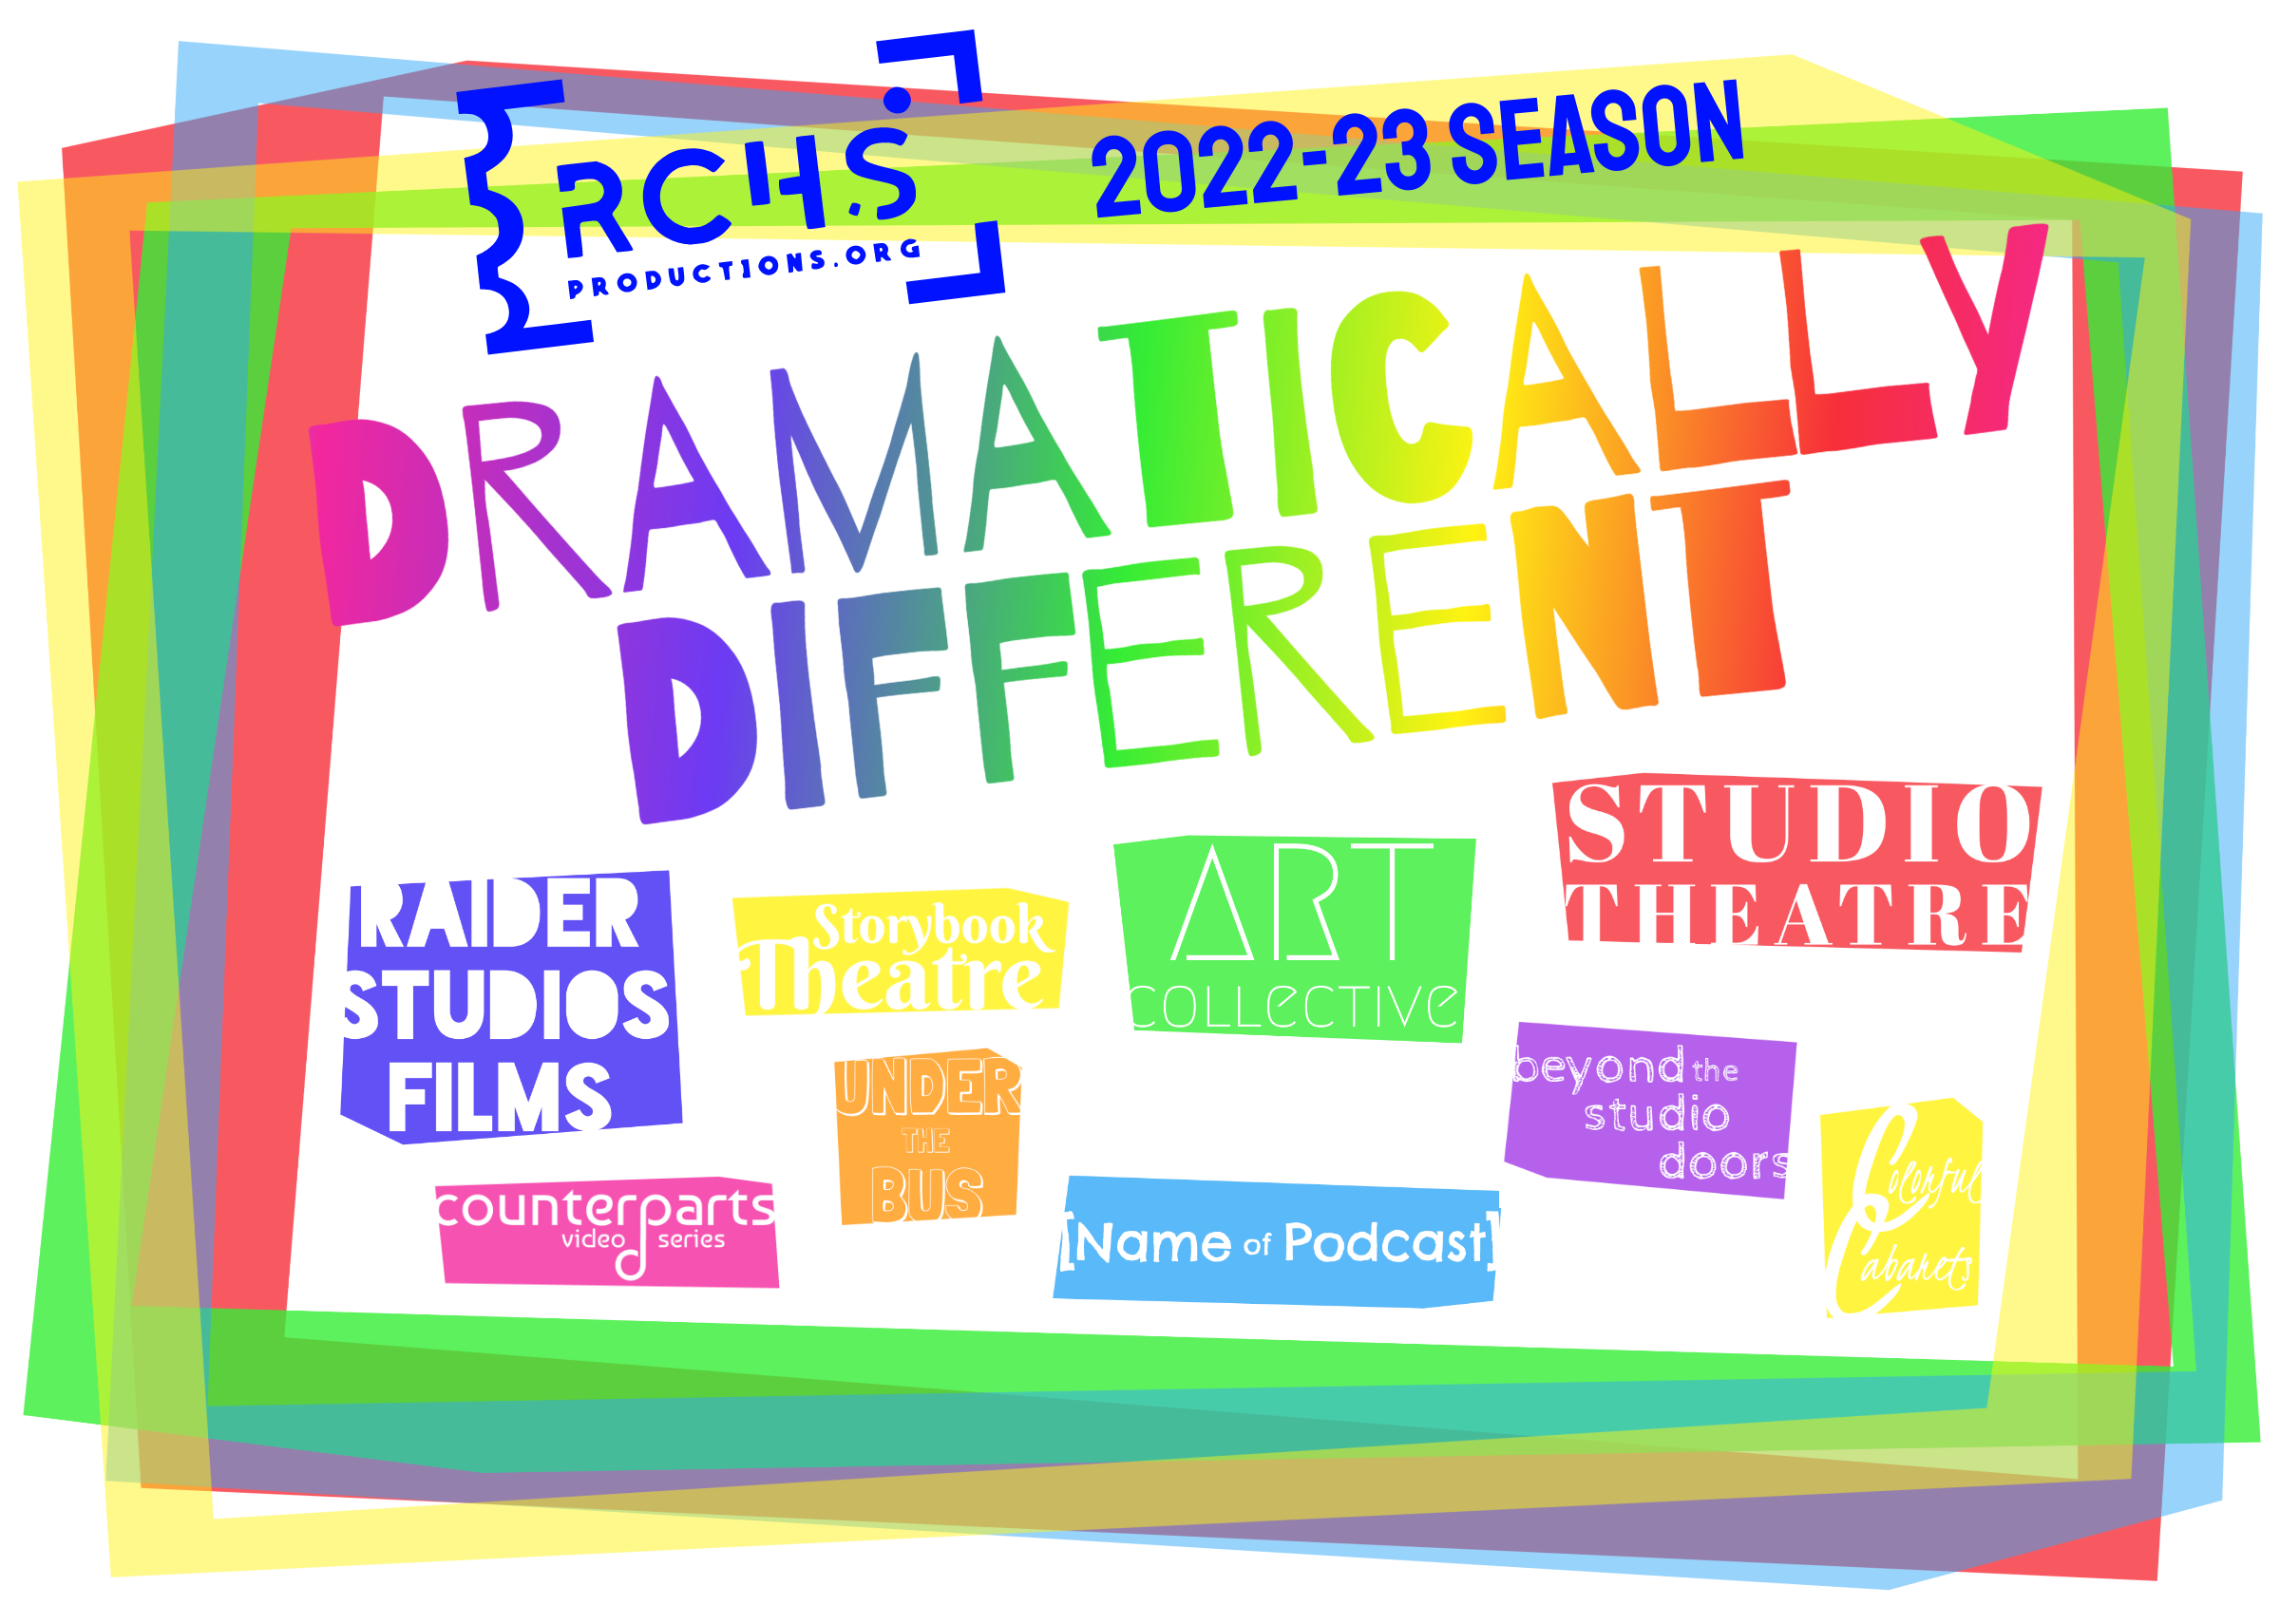 RCHS Productions 22-23 Season Theme: Dramatically Different